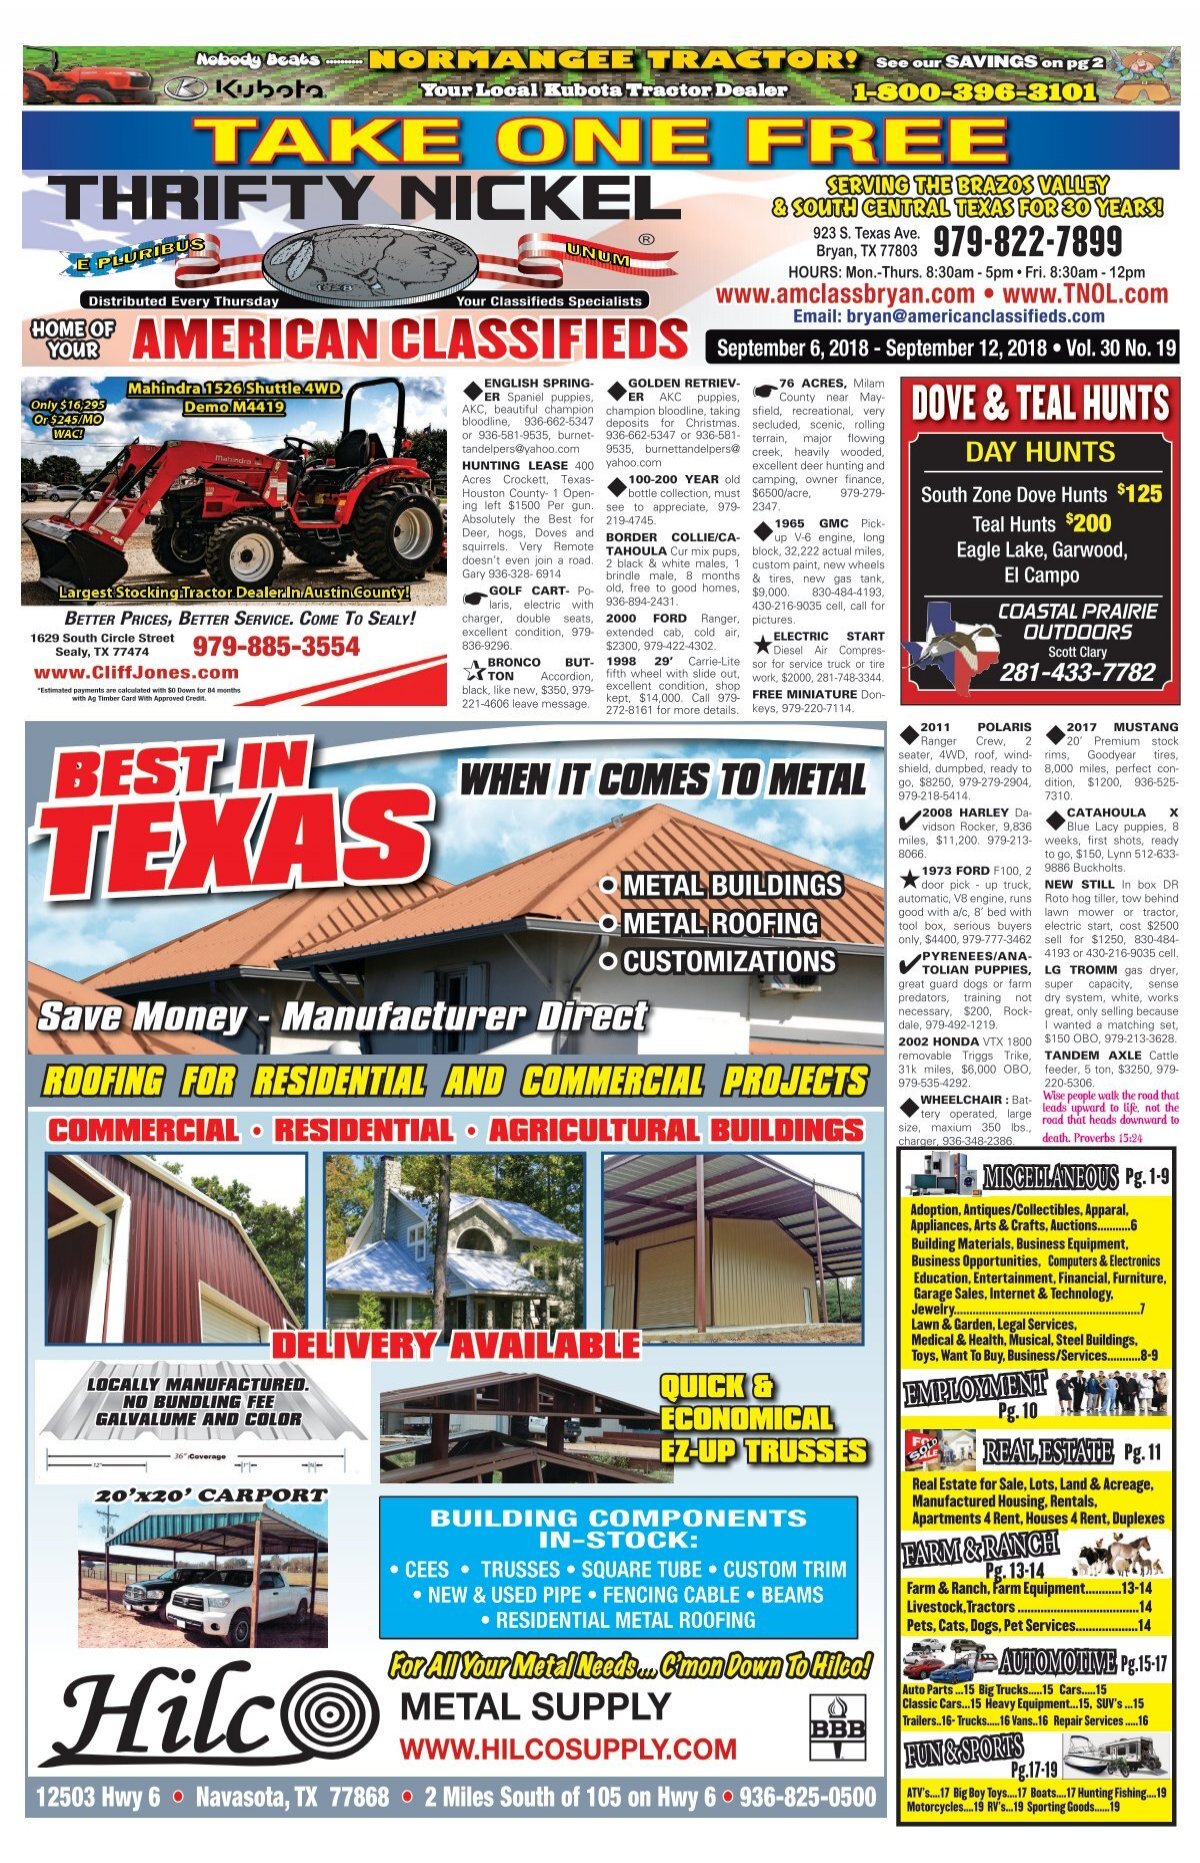 Thrifty Nickel/American Classifieds Sept. 6th Edition Bryan